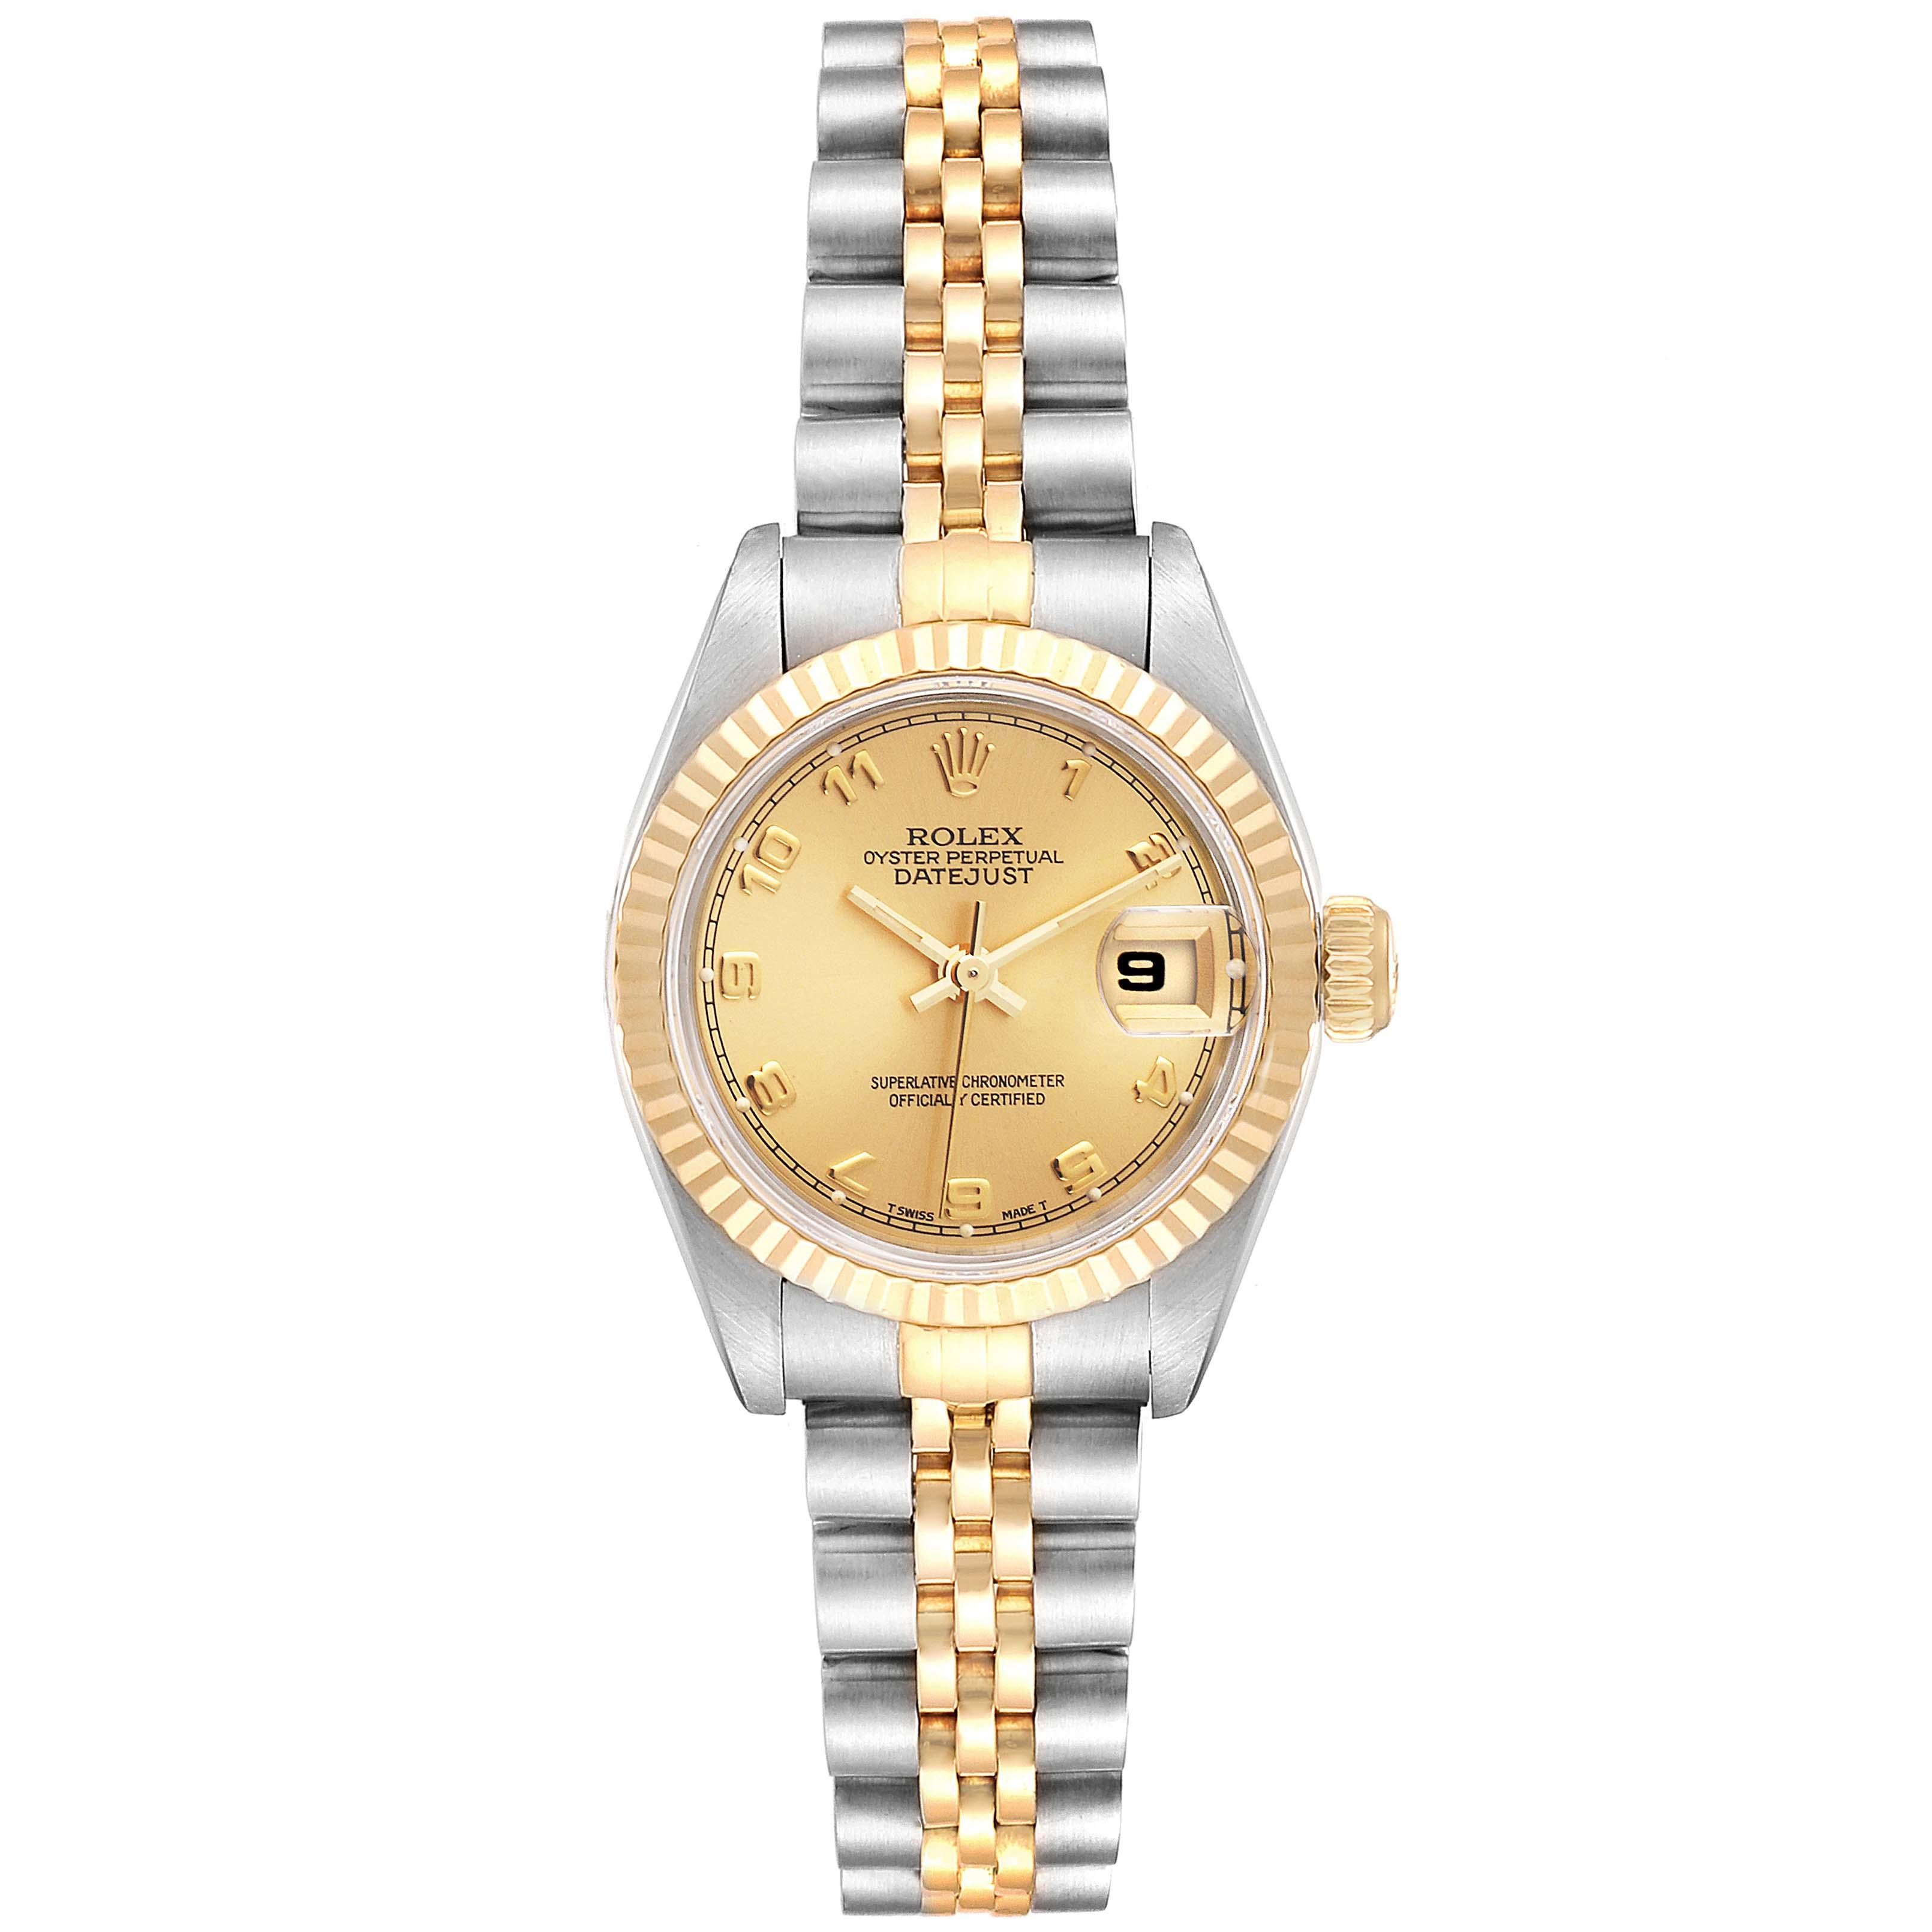 Rolex Datejust Steel Yellow Gold Ladies Watch 69173 Box Papers. Officially certified chronometer self-winding movement. Stainless steel oyster case 26.0 mm in diameter. Rolex logo on a crown. 18k yellow gold fluted bezel. Scratch resistant sapphire